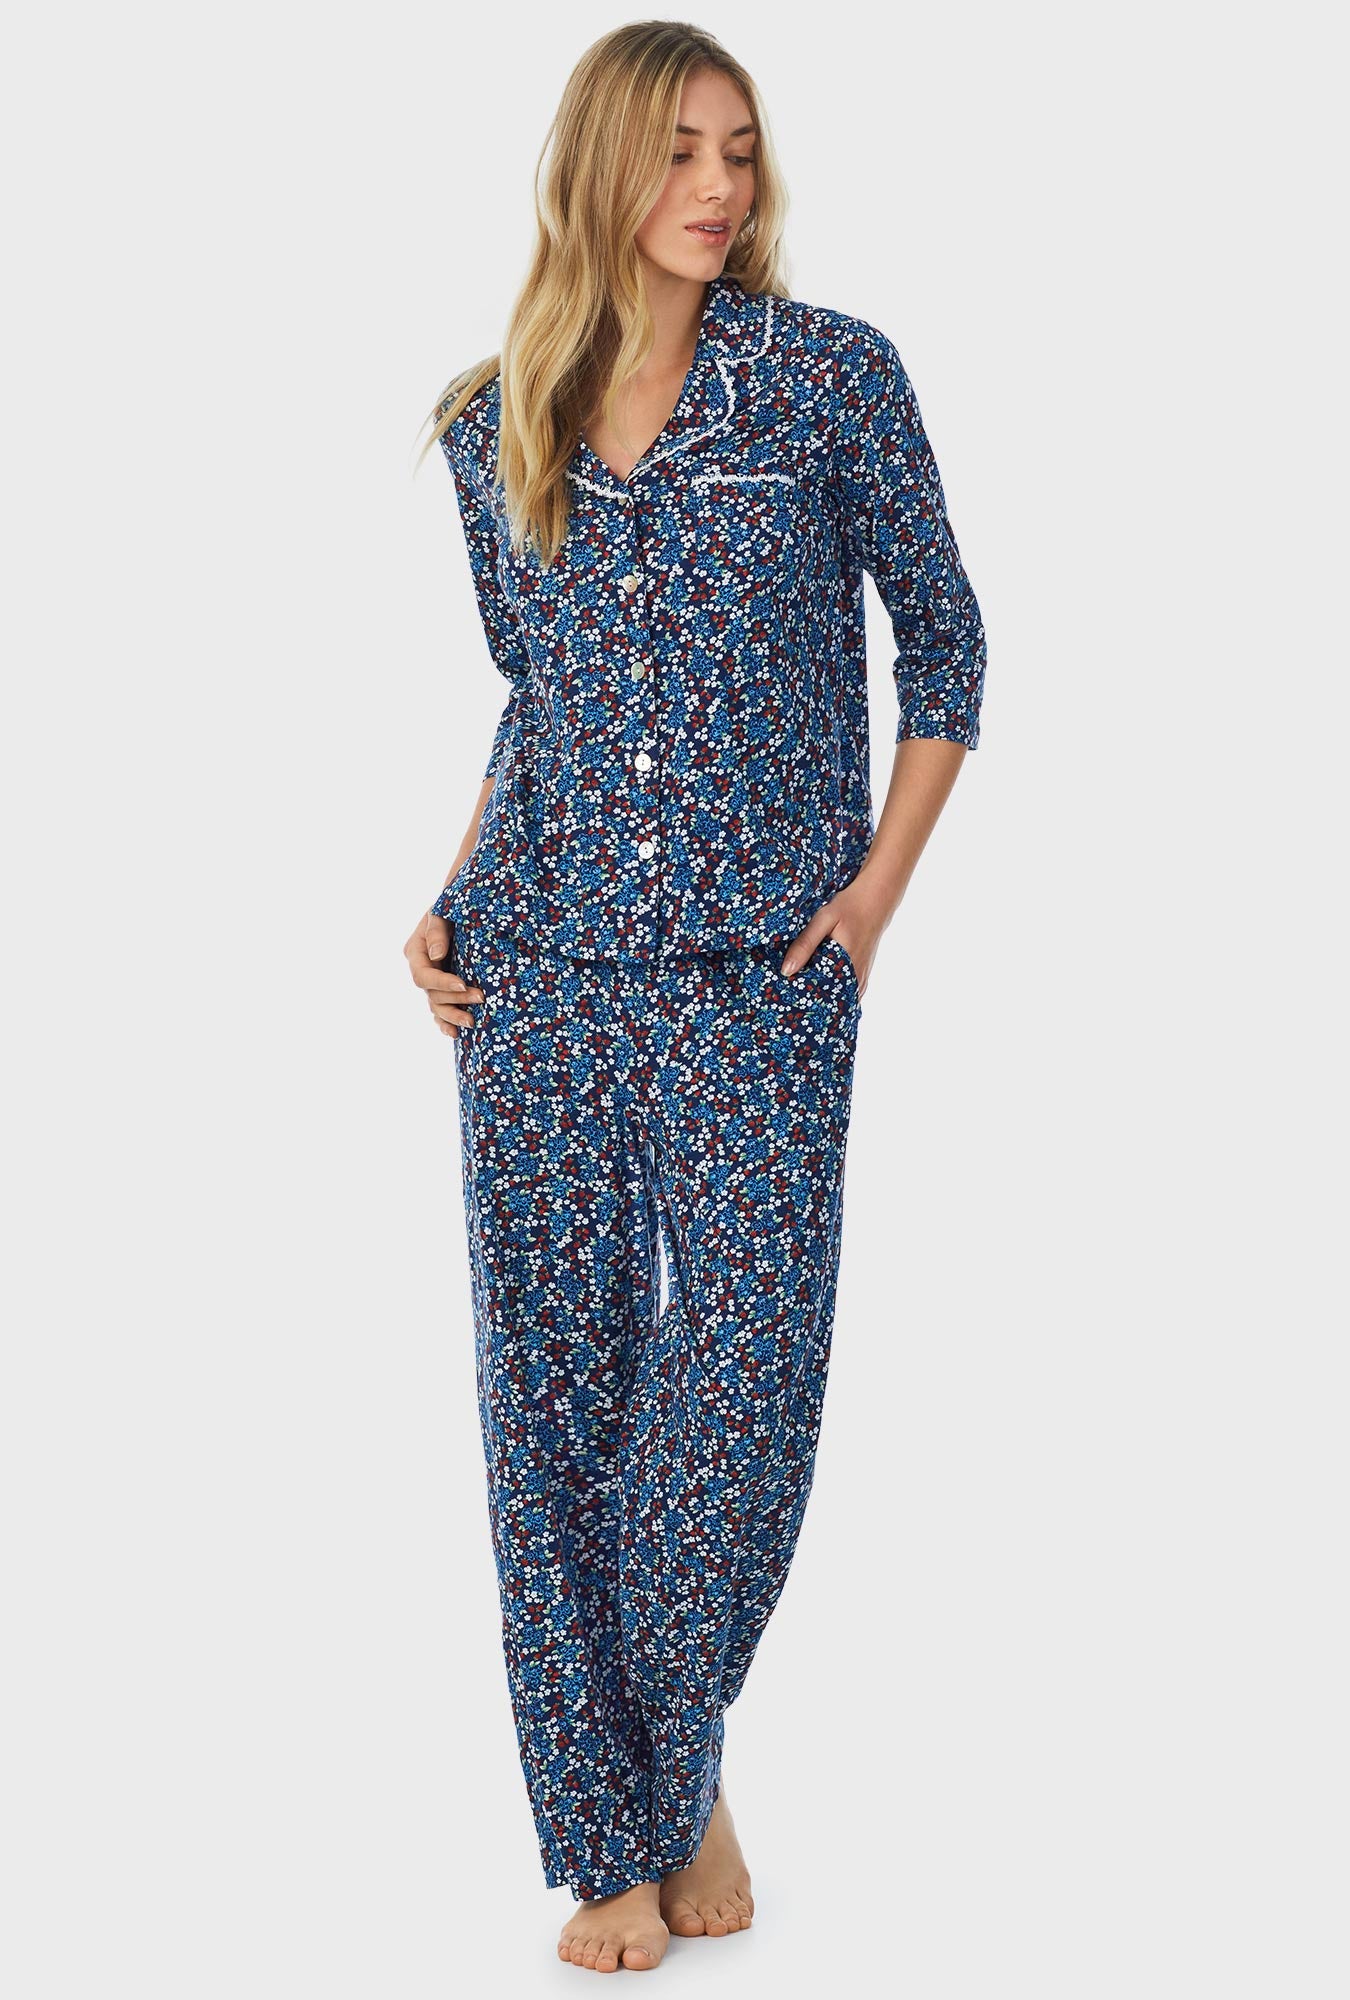 A lady wearing blue quarter sleeve long pajama set with moonlight print.